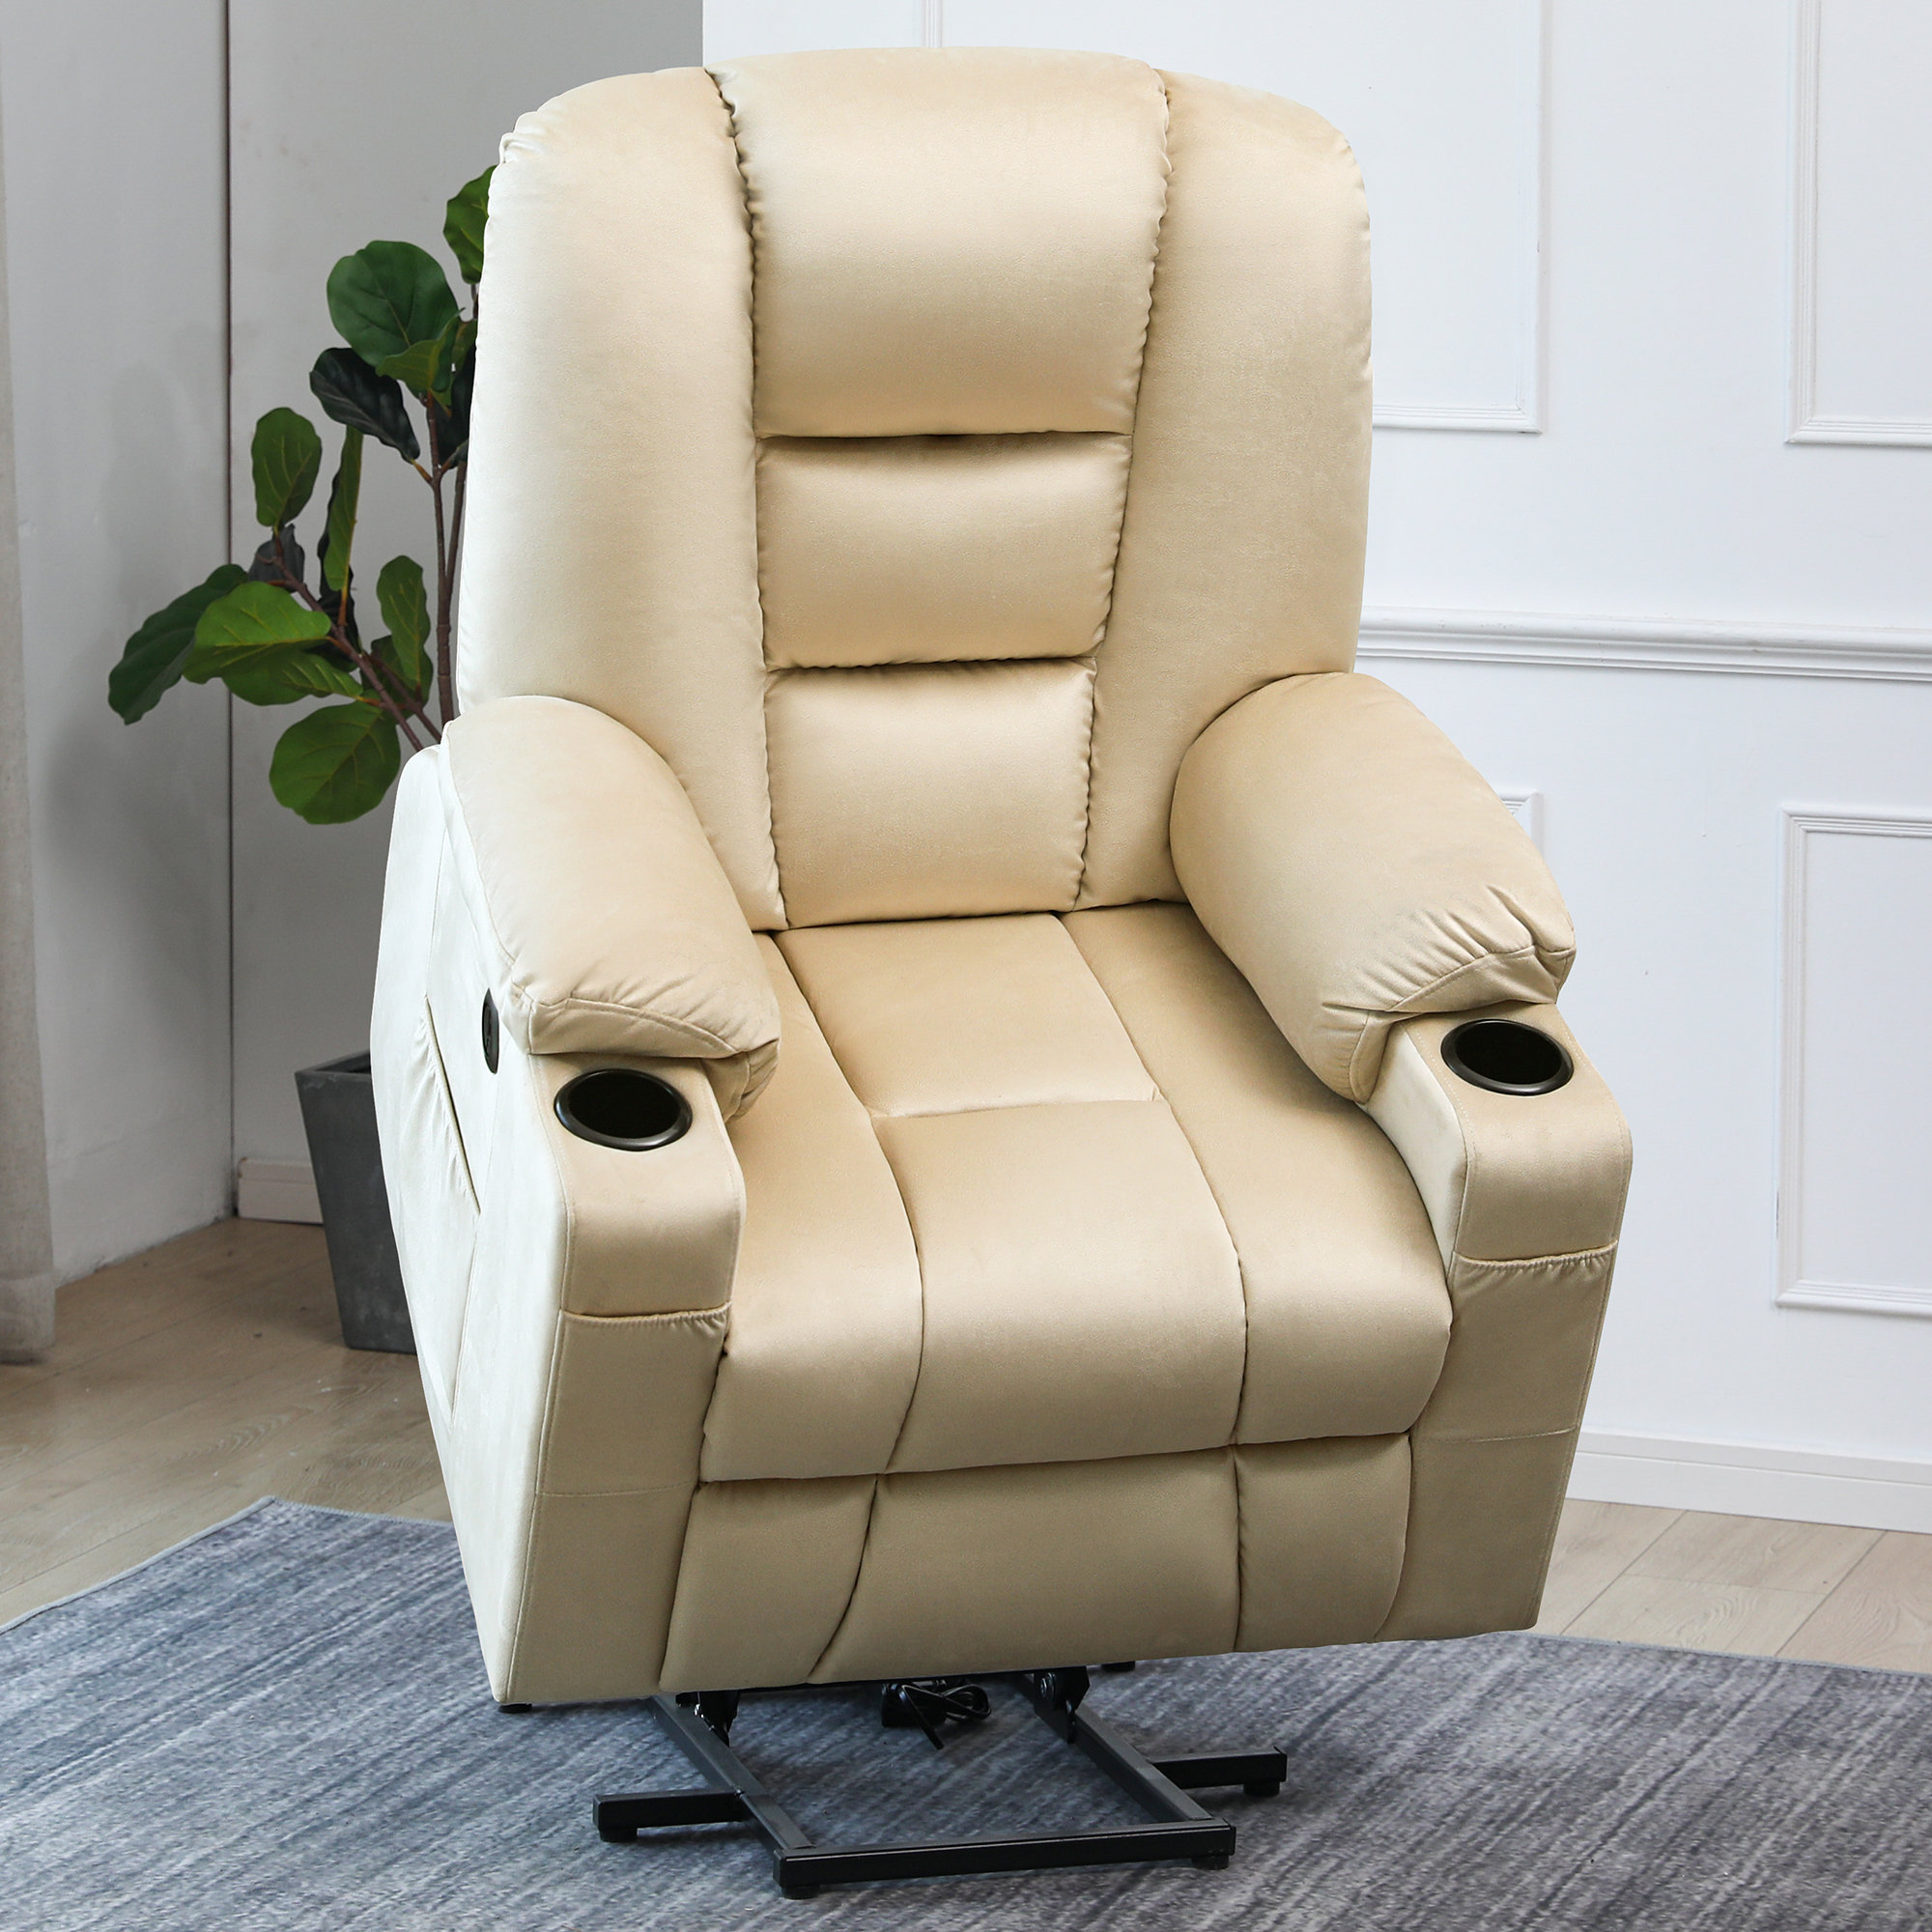 Power Lift Chair for Short People with Heat and Vibration Remote